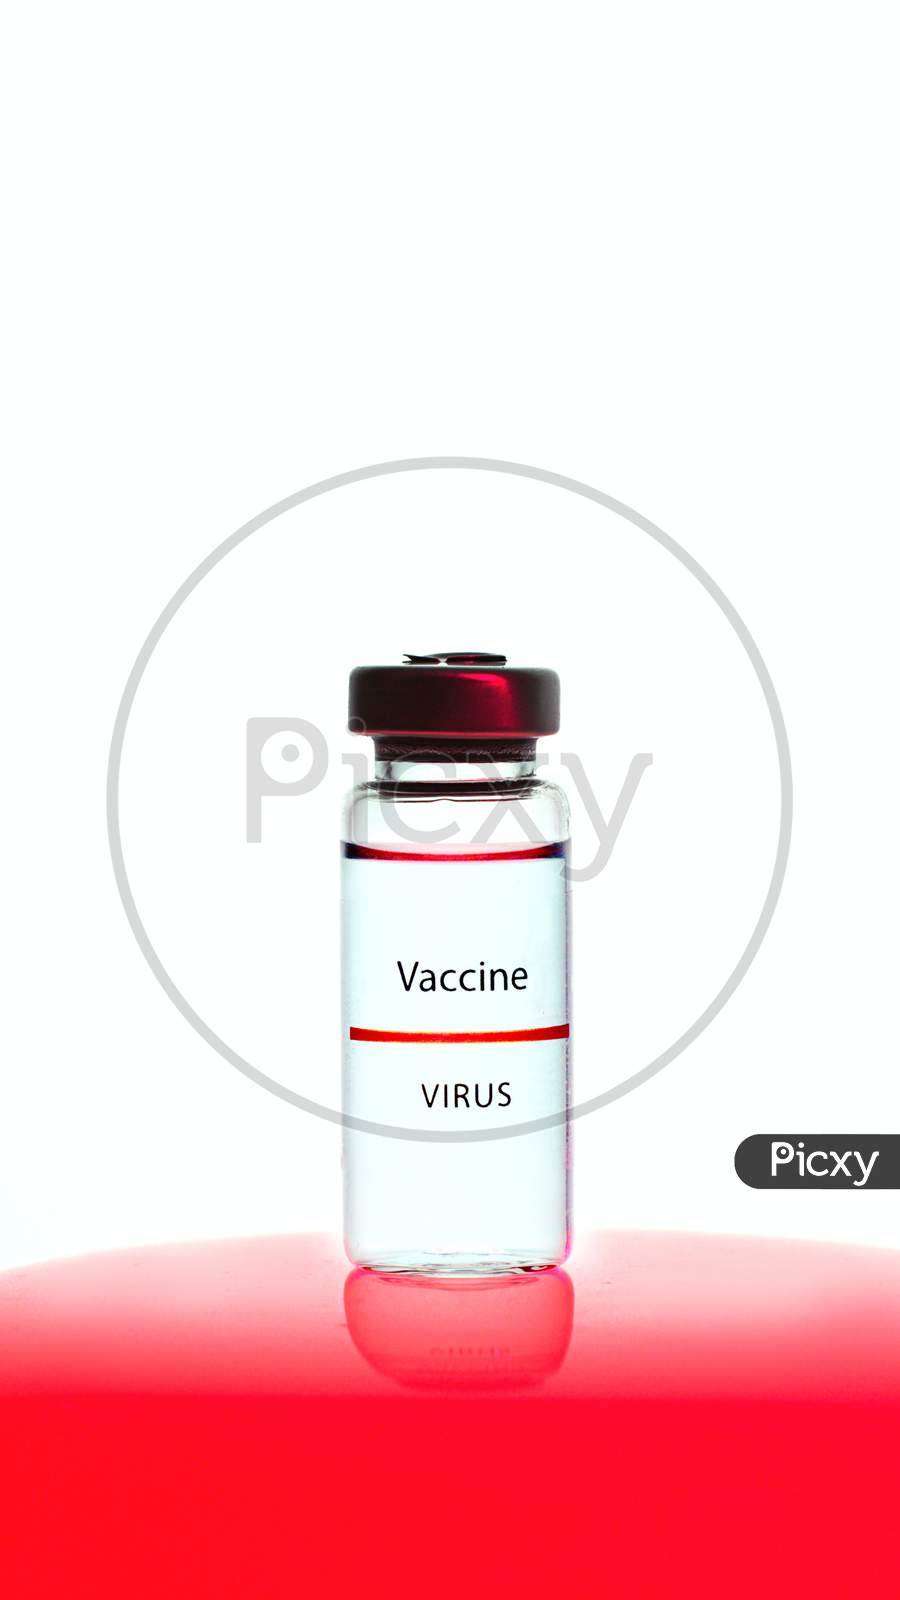 Vaccine of covid-19 wave 2